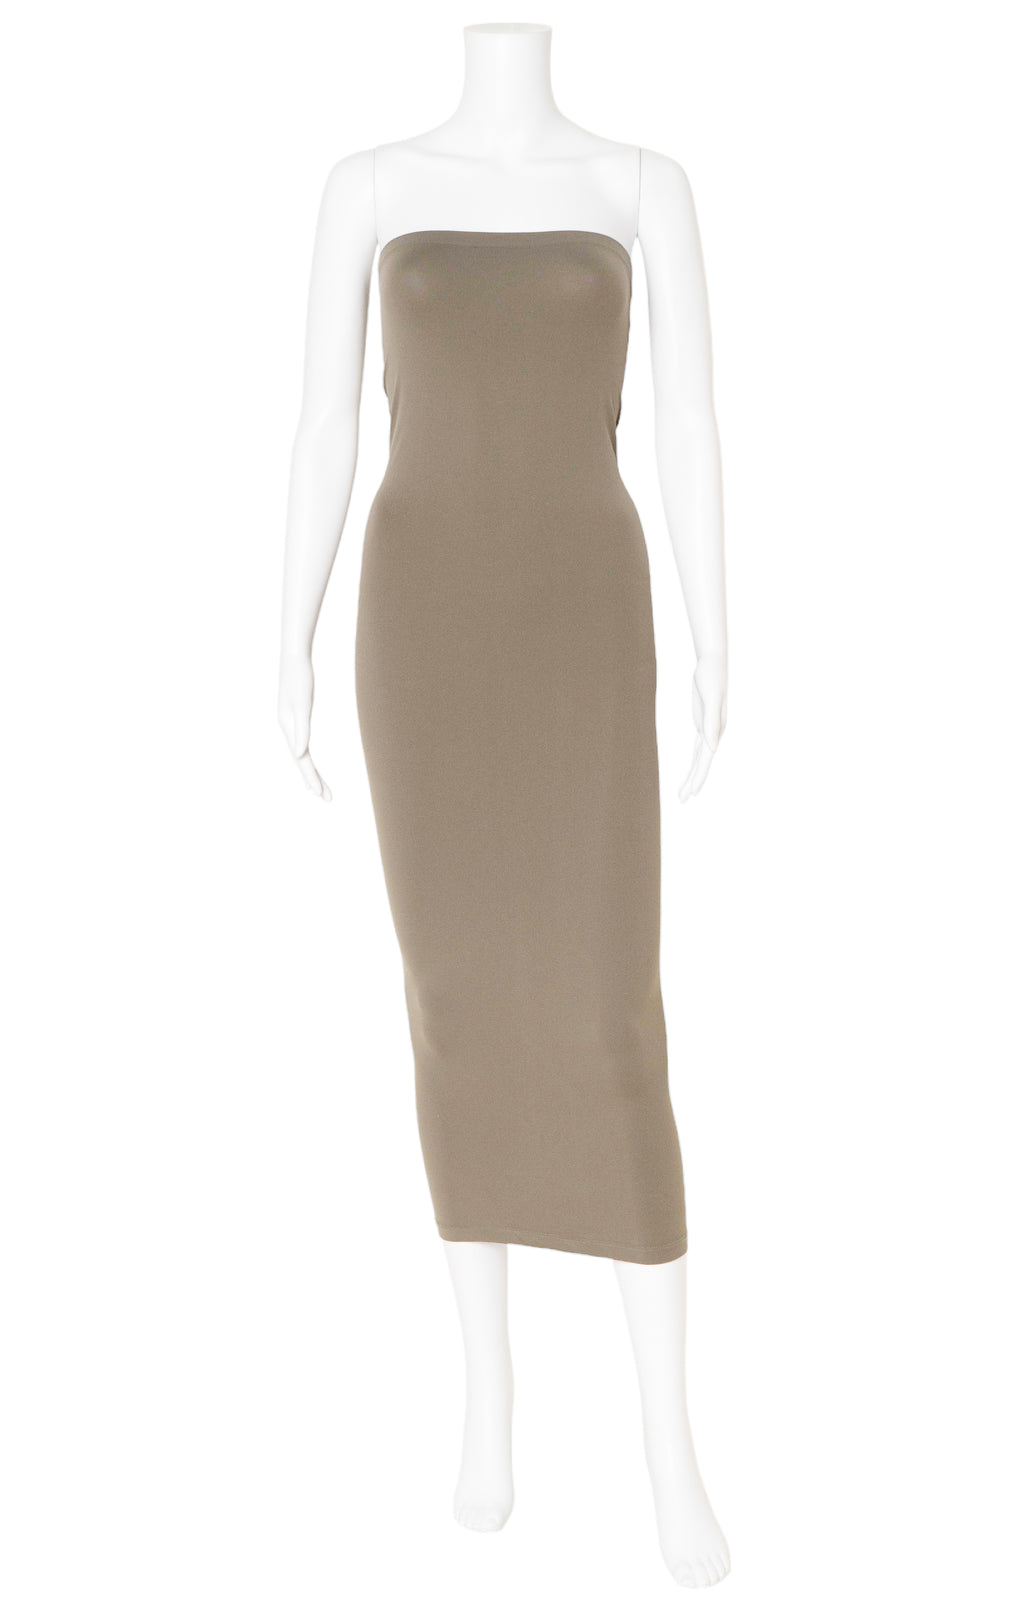 WOLFORD Dress Size: S